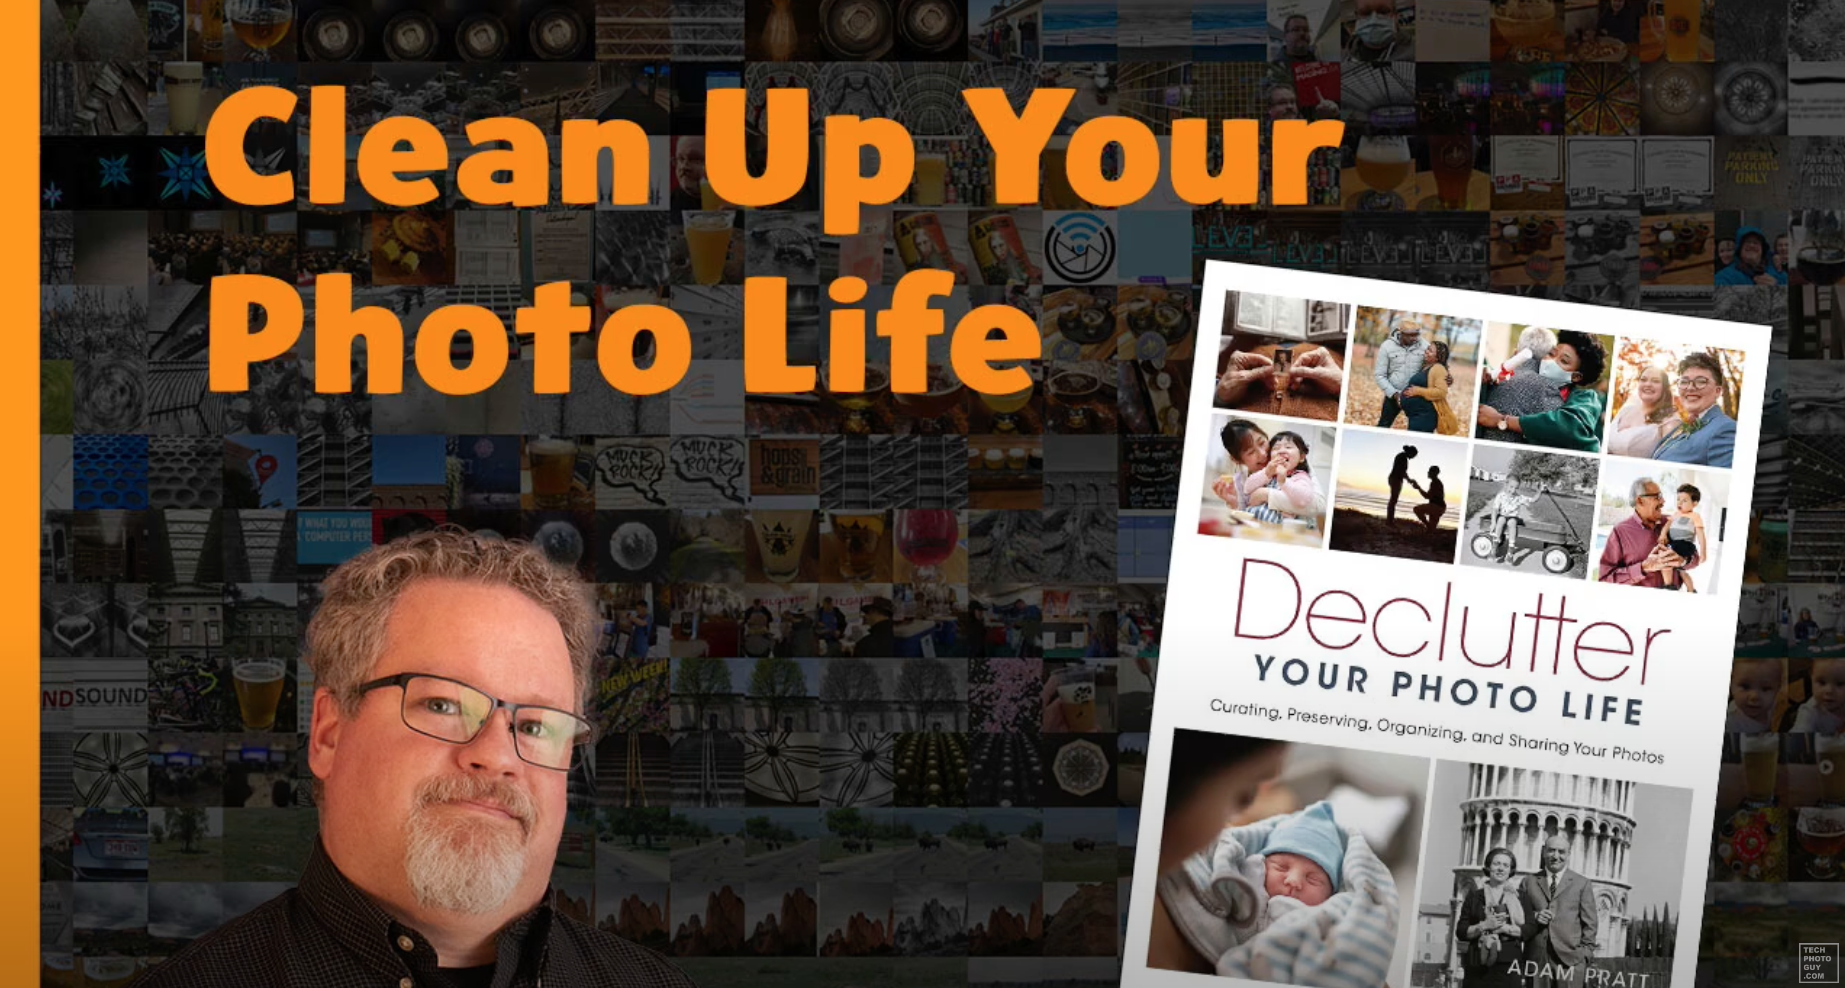 Tech Photo Guy Podcast with Aaron Hockley Declutter Your Photo Life by Adam Pratt